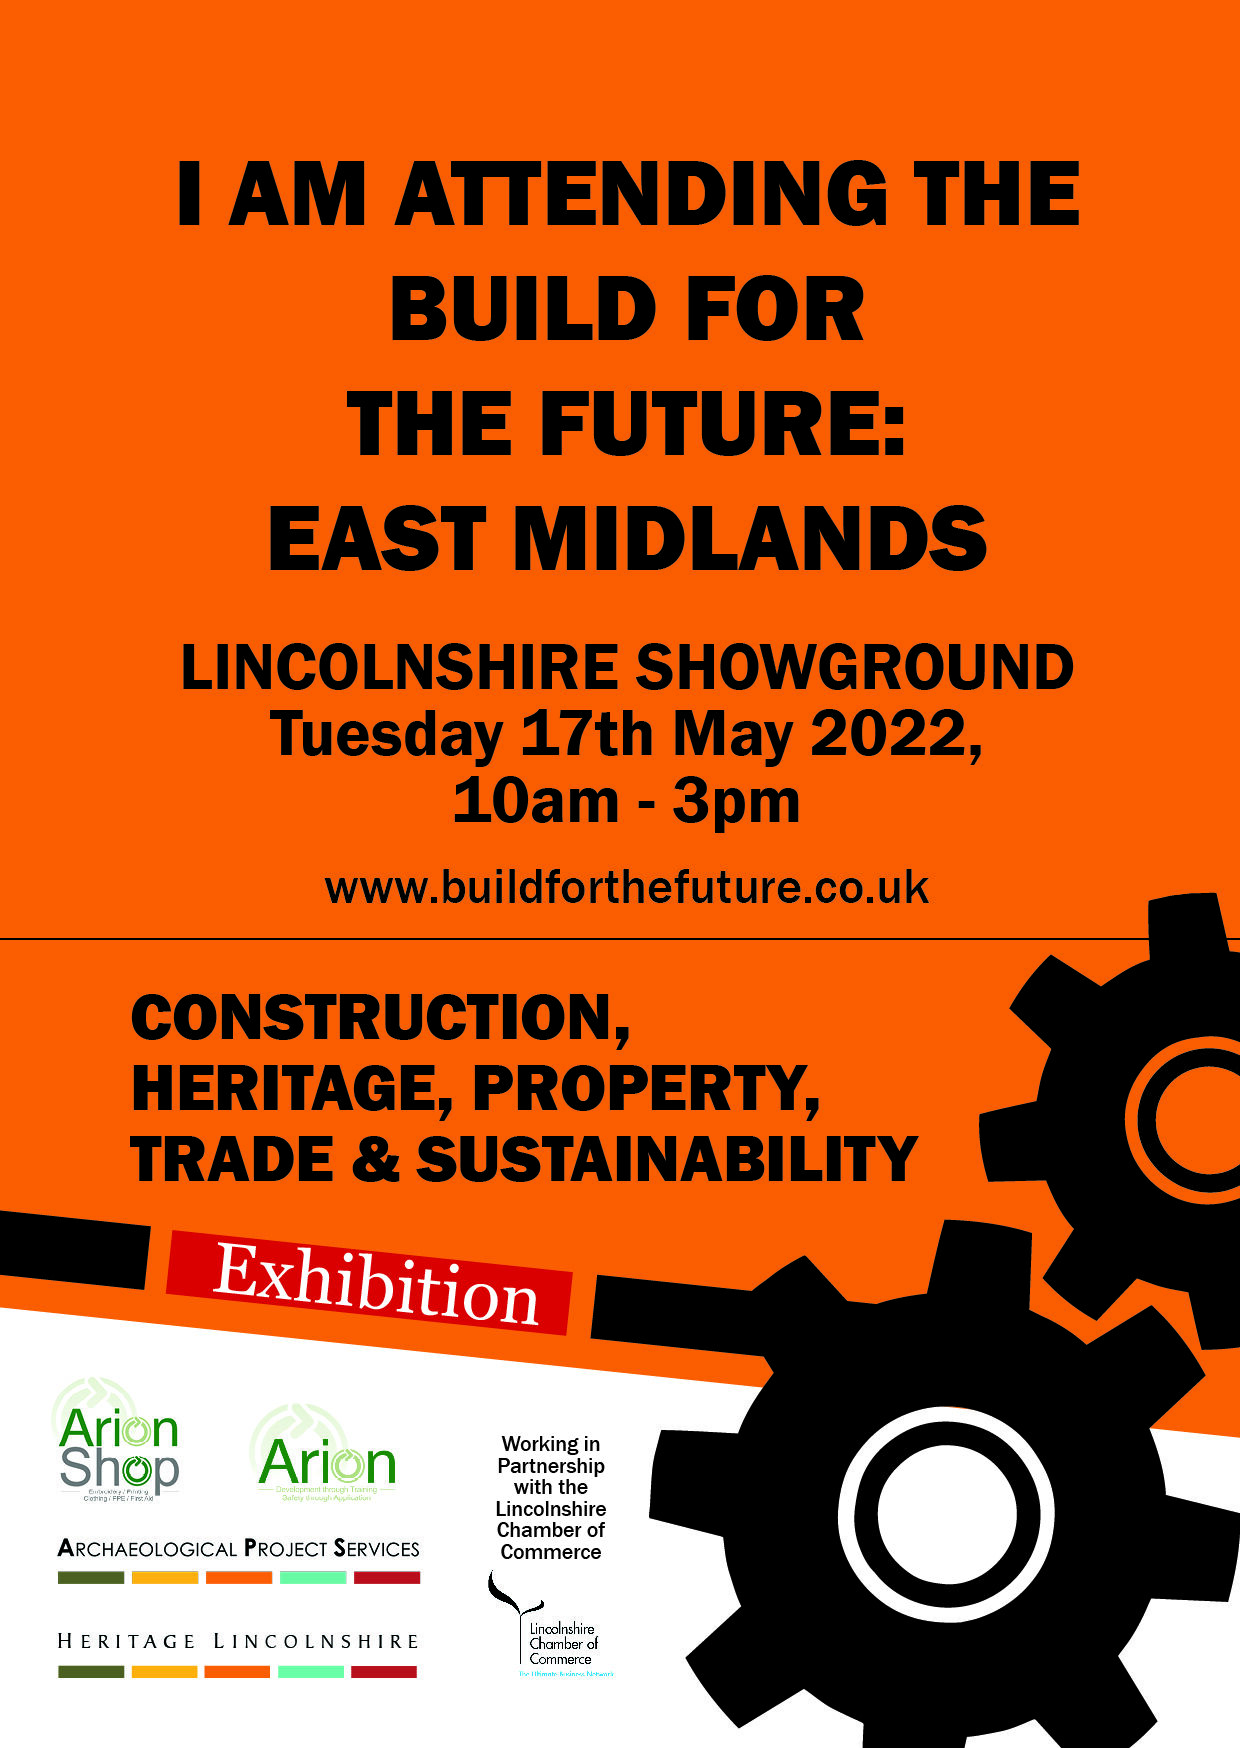 Build for the Future East Midlands at the Lincolnshire Showground